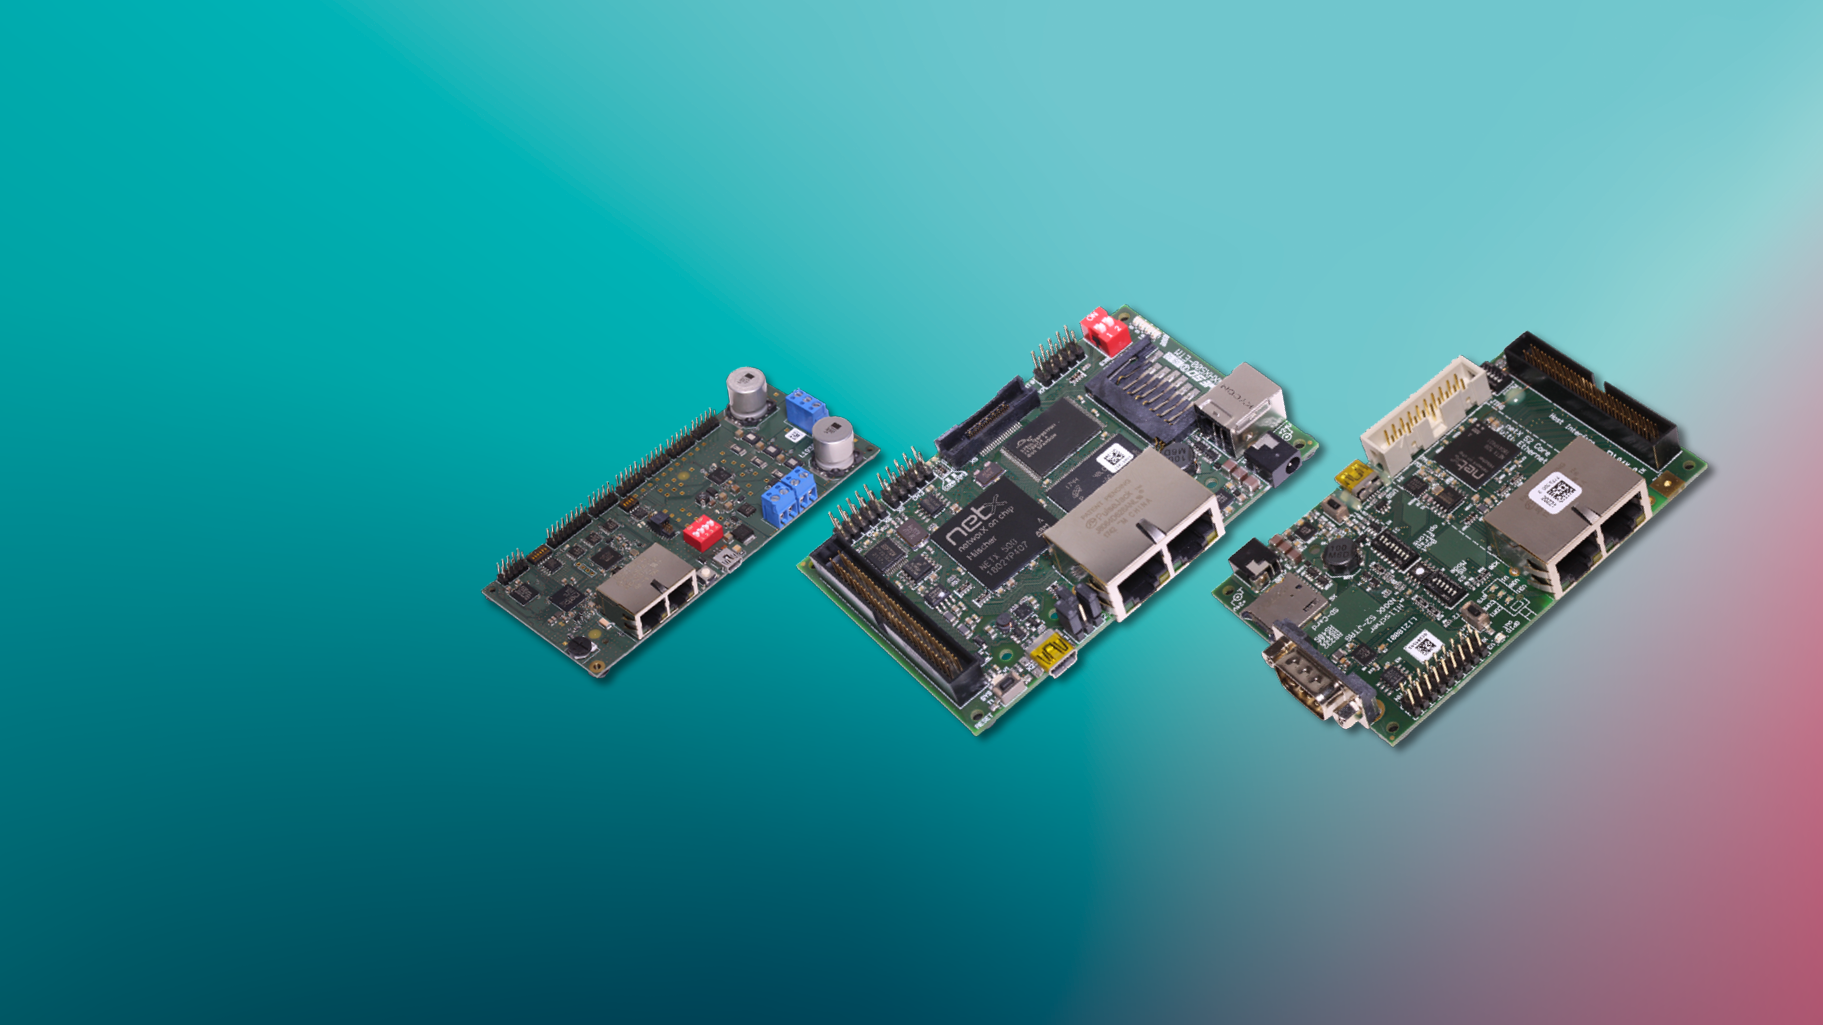 Three evaluation boards with netX SoCs onboard lined up on a colorful background.